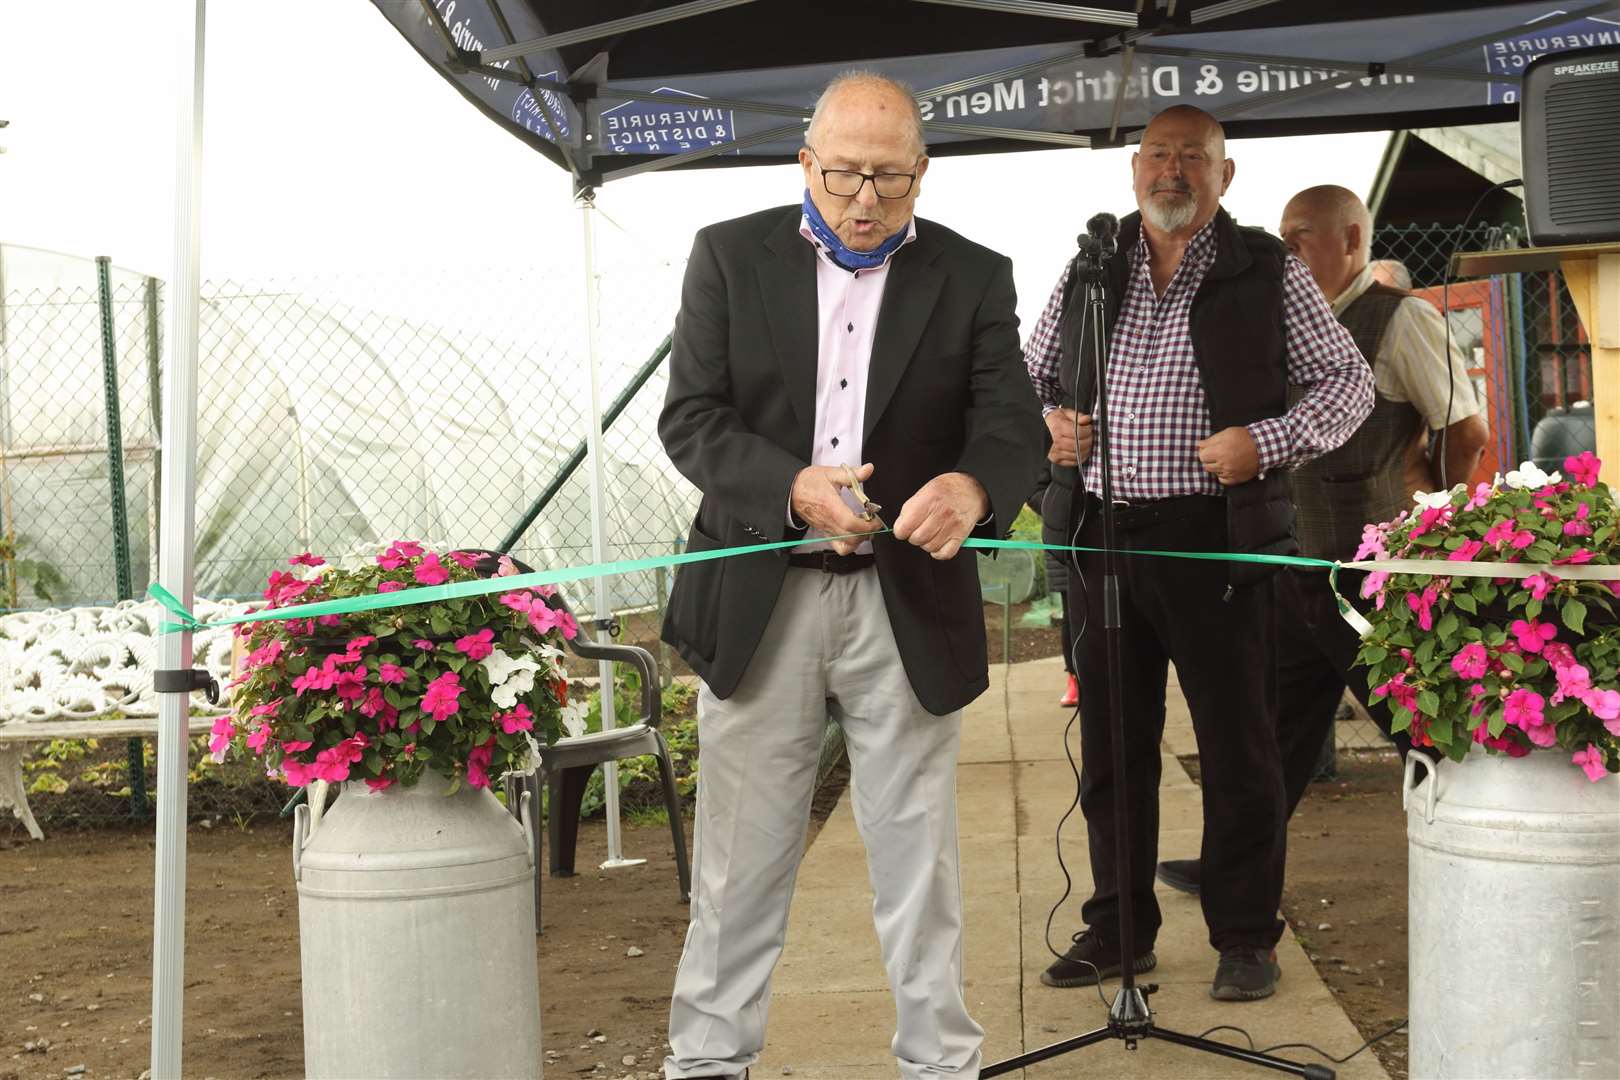 George Ross officially opened the allotments in August last year